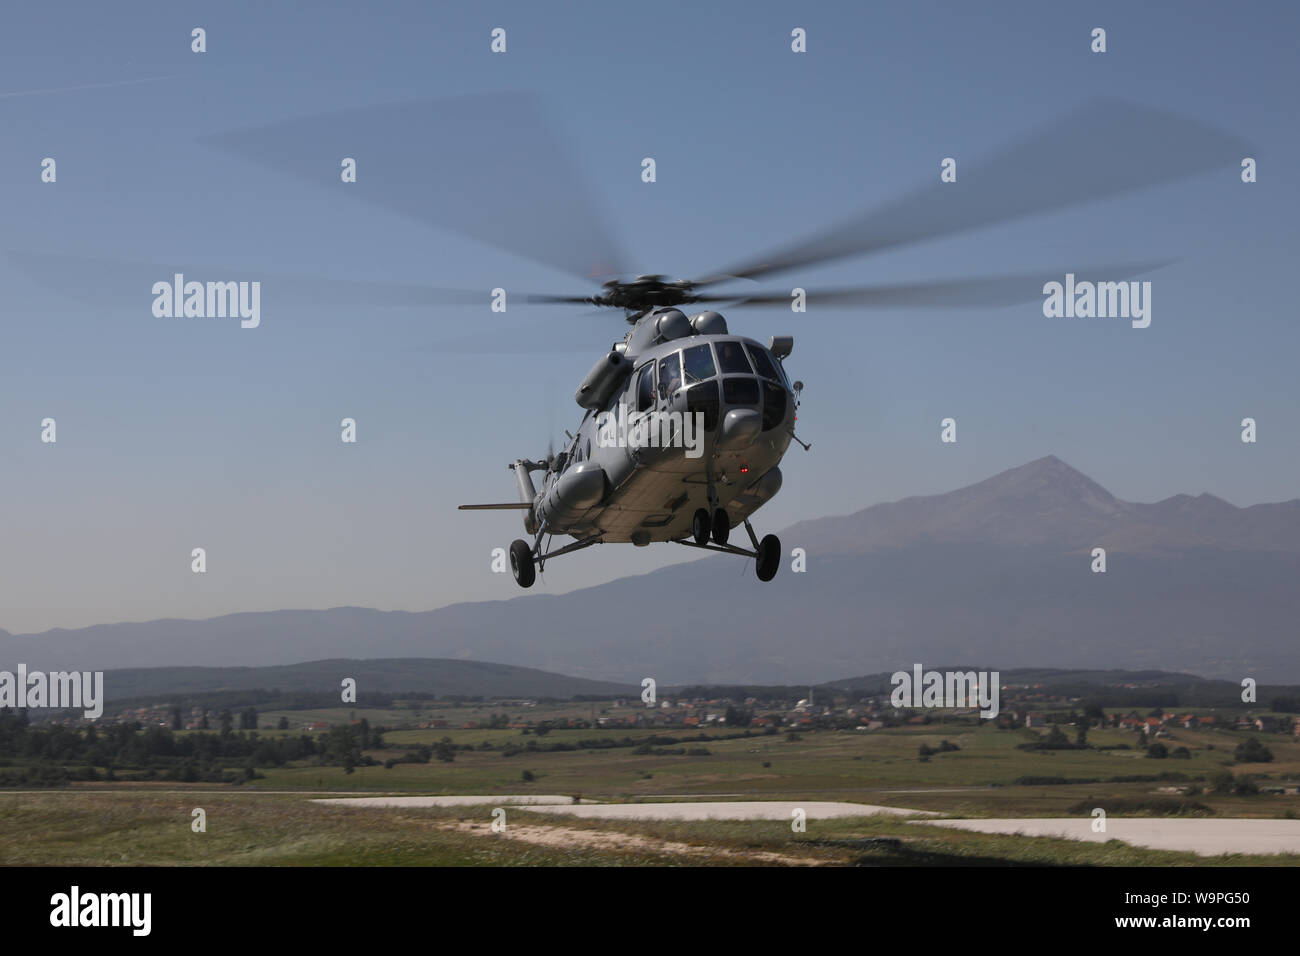 A Croatian Air Force transport helicopter, MI-17, prepares to land at Camp  Bondsteel, Kosovo, Aug. 6, 2019. The role of the flight engineer is to  advise the pilot of any problems, make record of any flight issues and  observe the overall performance of the helicopter. The MI-17 is a medium  twin-turbine transport helicopter and is recognizable by its clamshell cargo  doors. (U.S. Army photo by Spc. Grant Ligon, 40th Public Affairs Detachment) Stock Photo